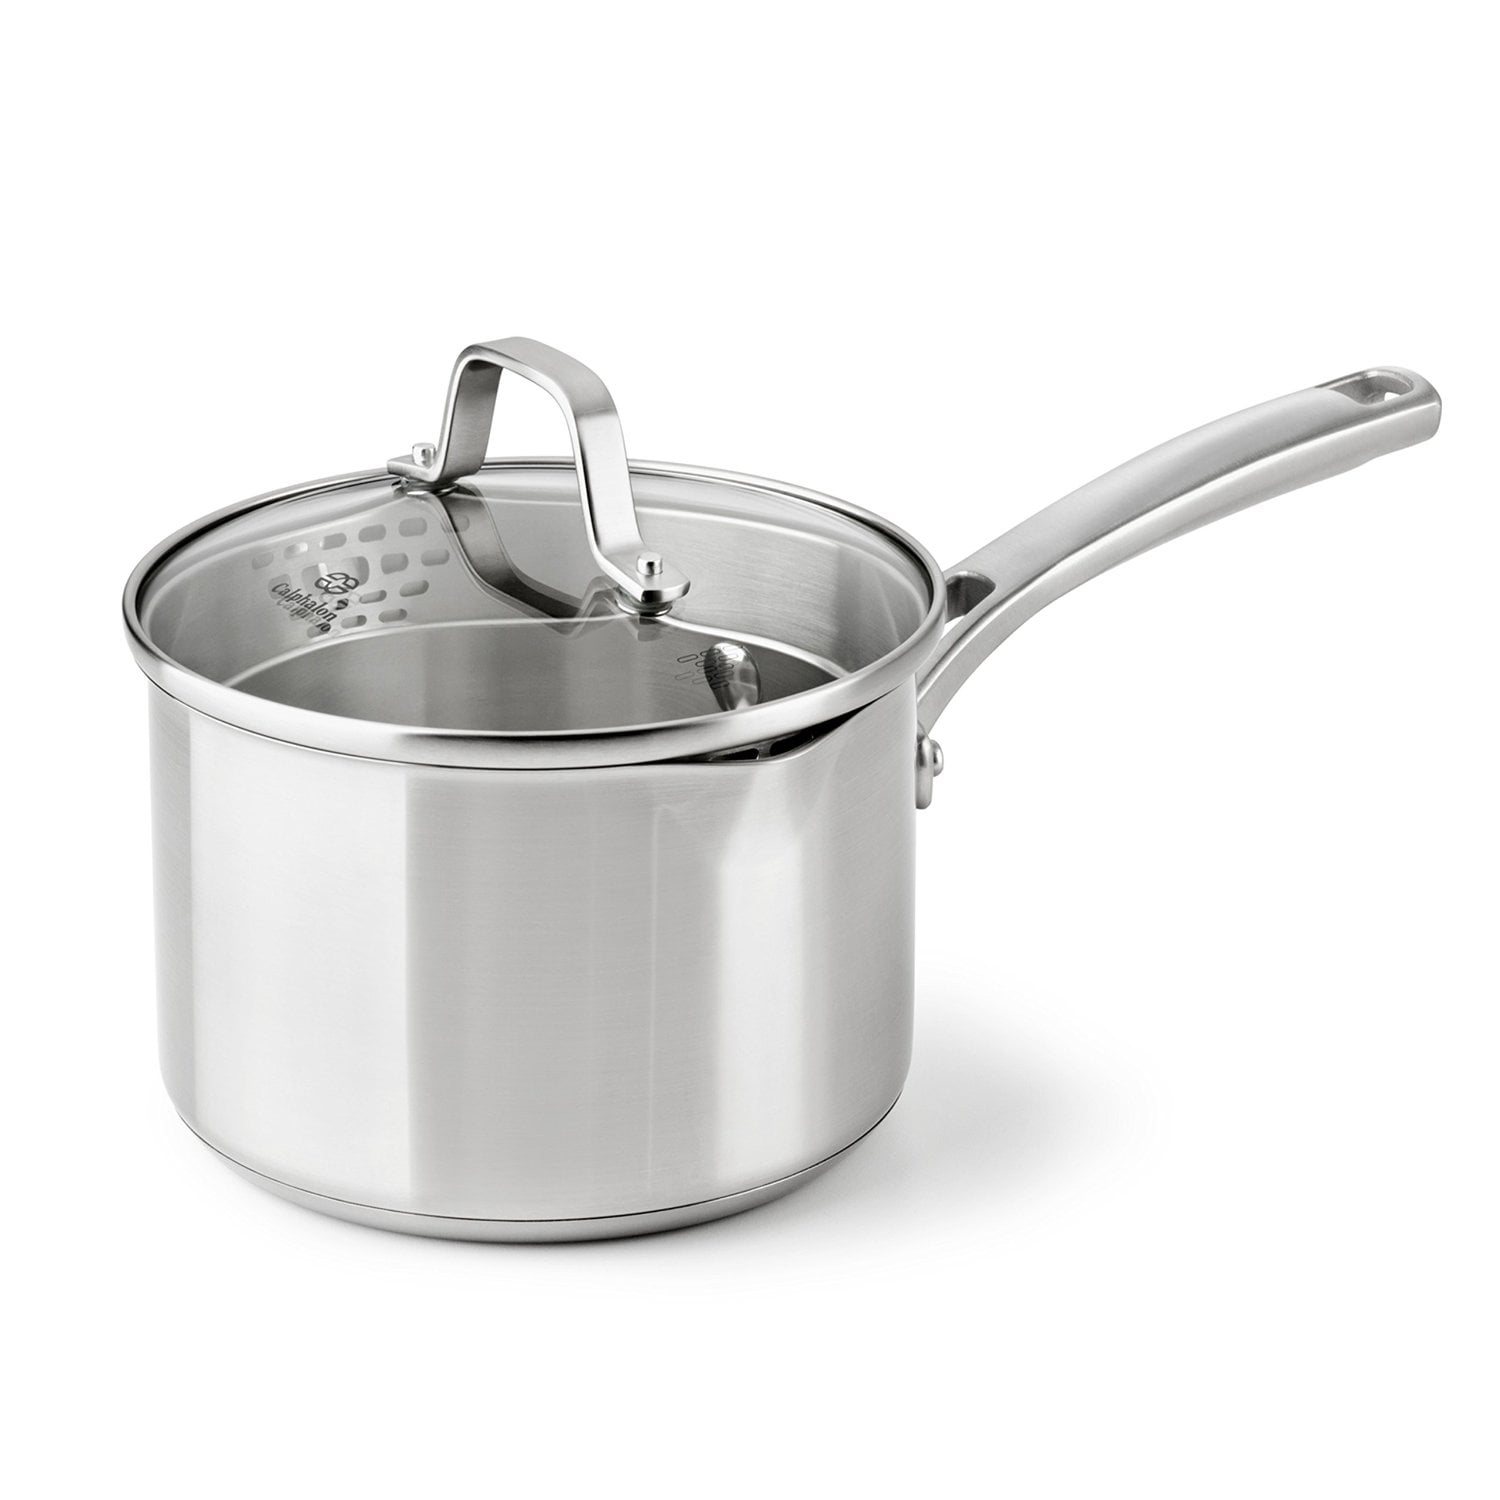 Calphalon Select 2.5 qt. Stainless Steel Sauce Pan with Glass Lid